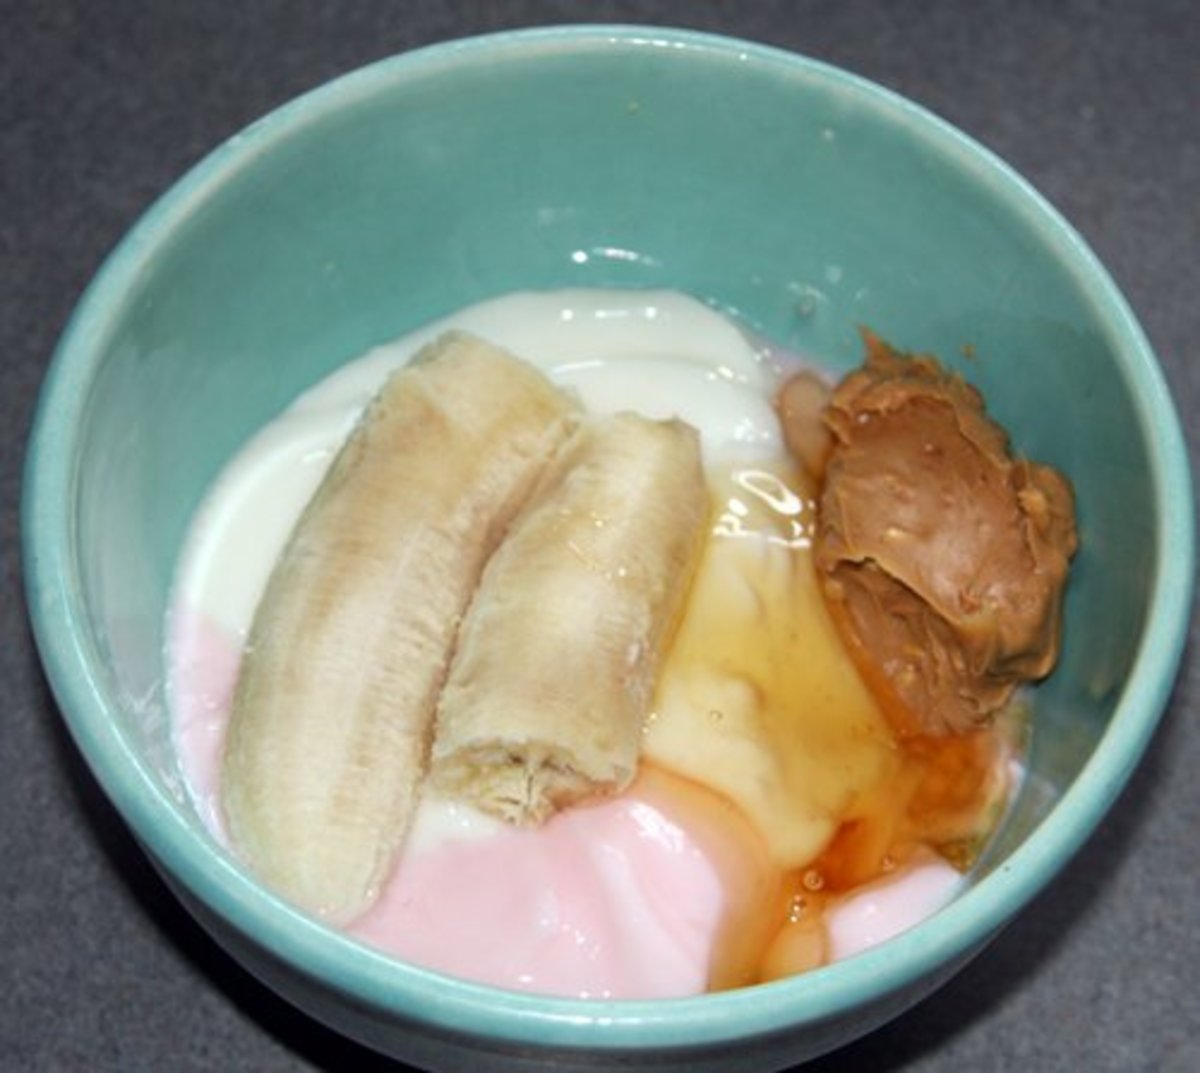 Yogurt, banana, peanut butter and honey are the basic ingredients in the Frosty Paws recipe.